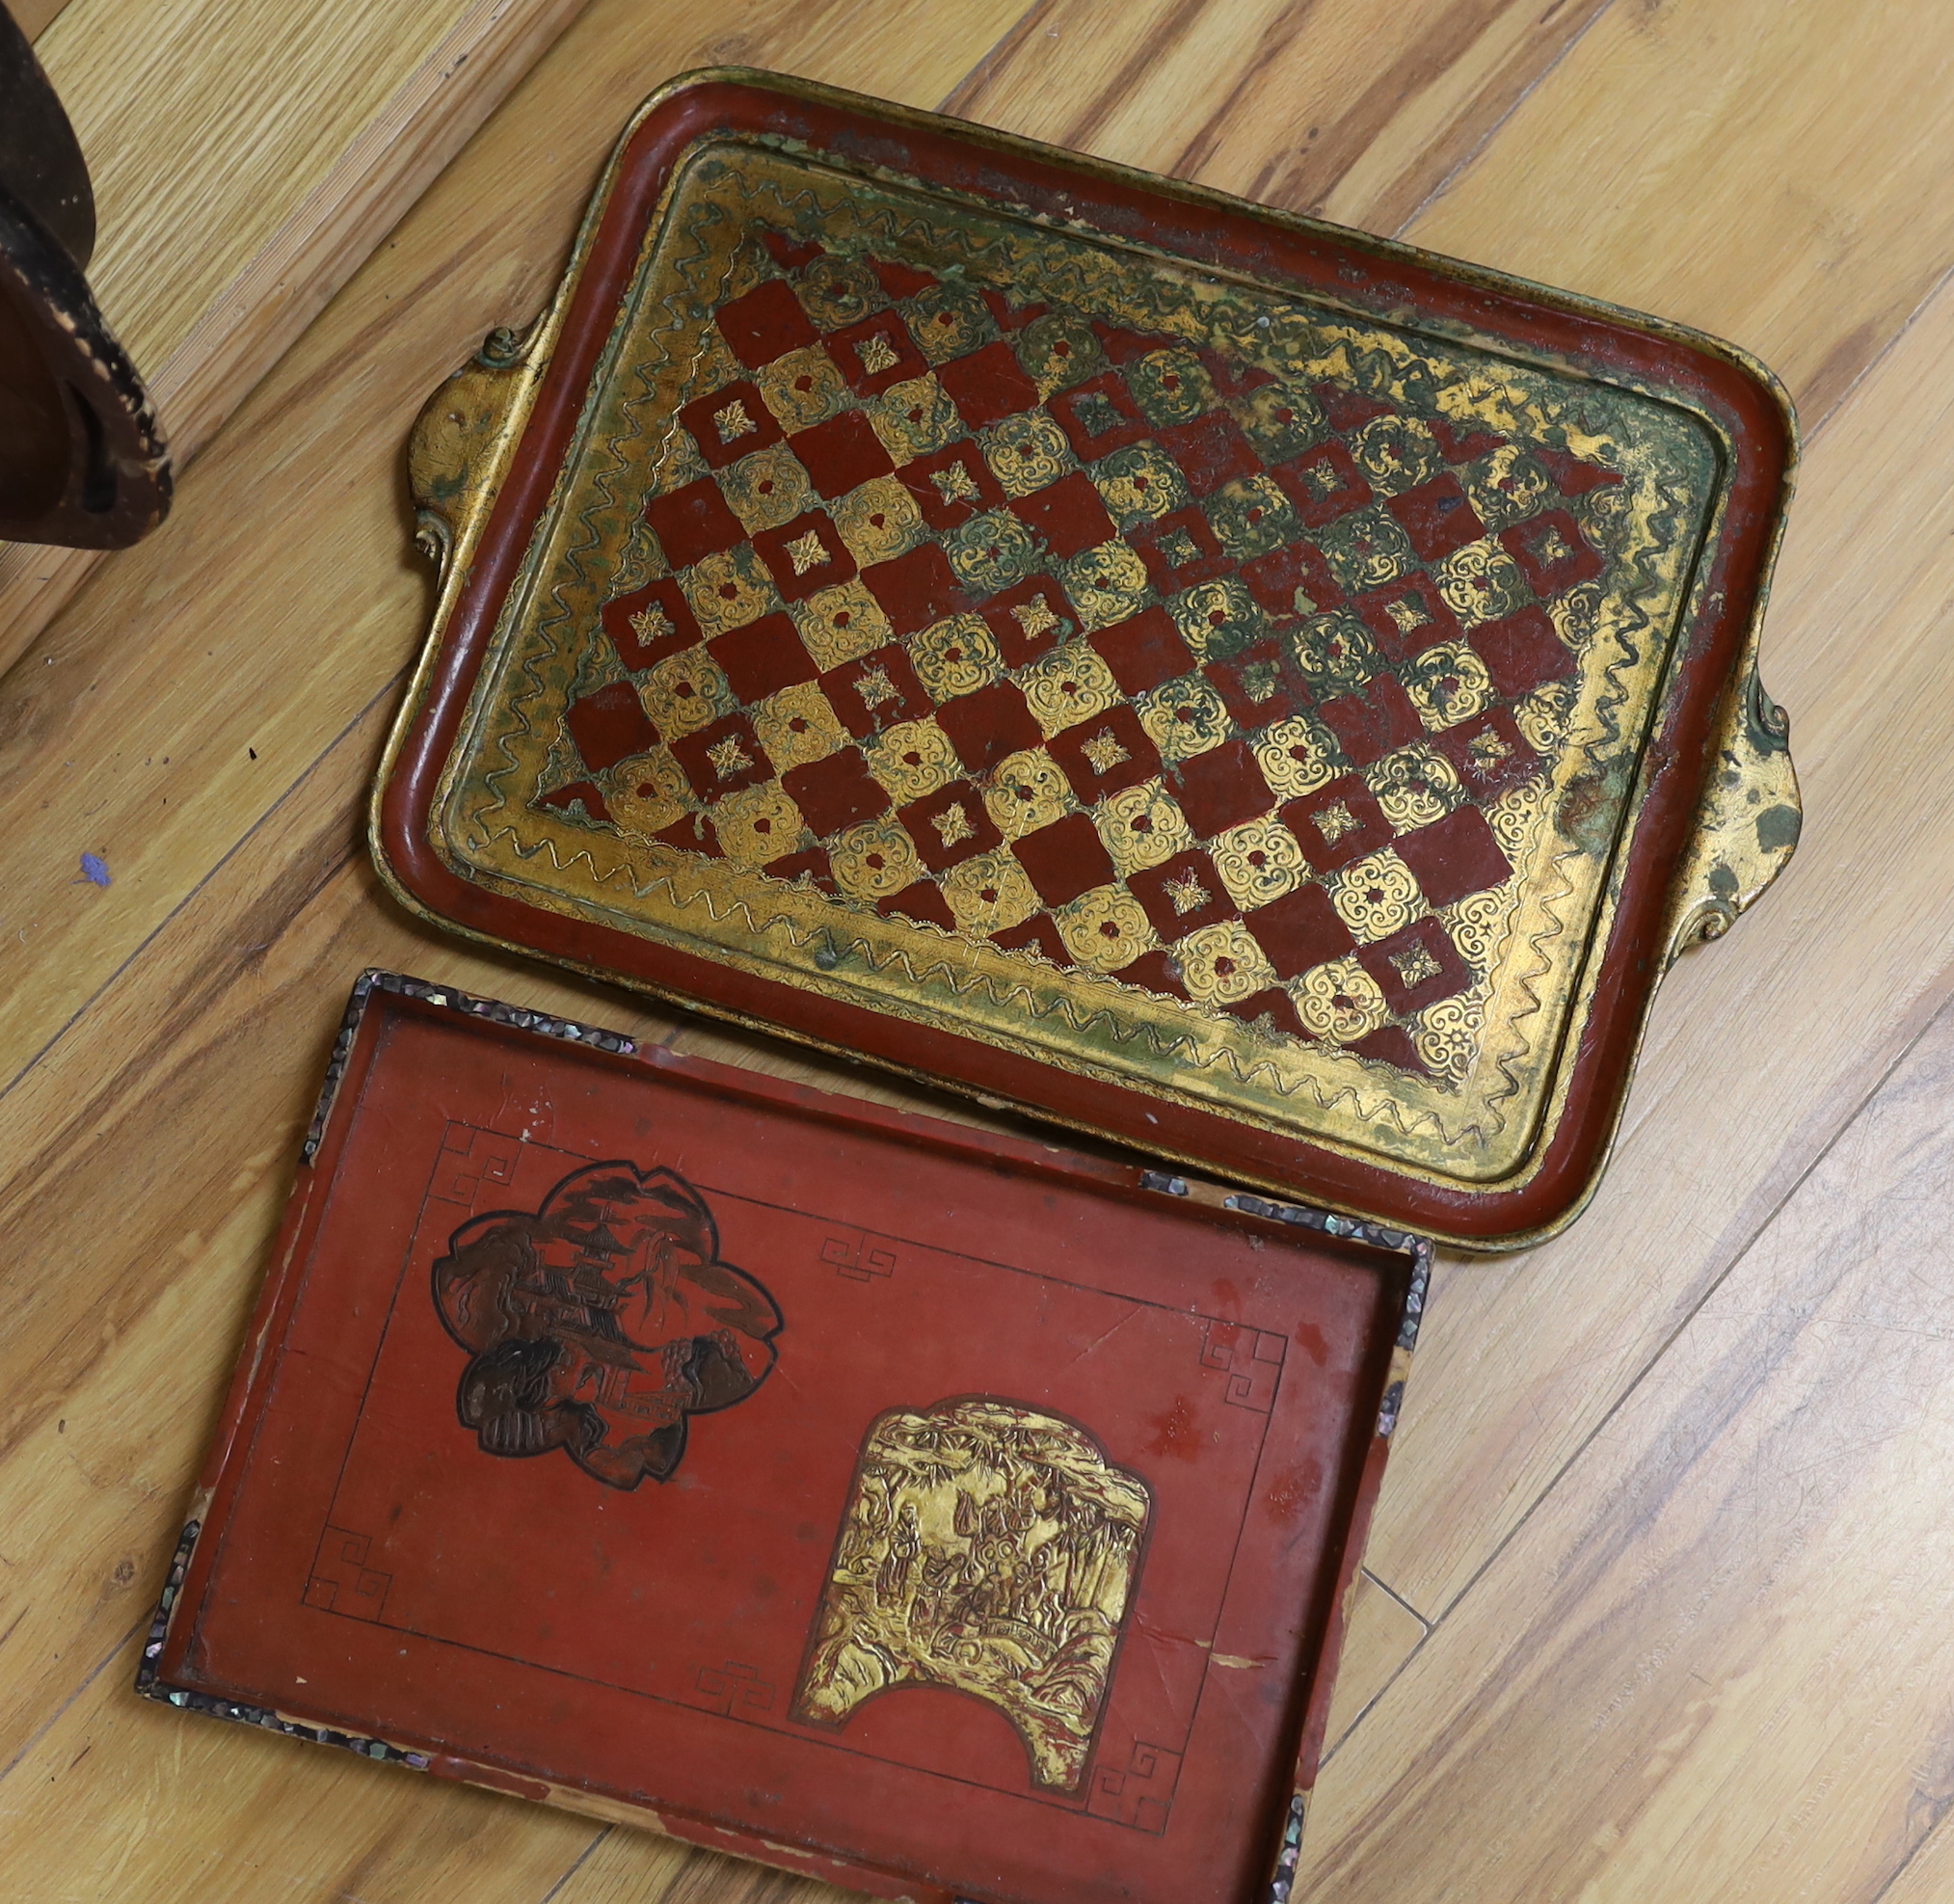 A quantity of assorted lacquer ware boxes, trays etc.